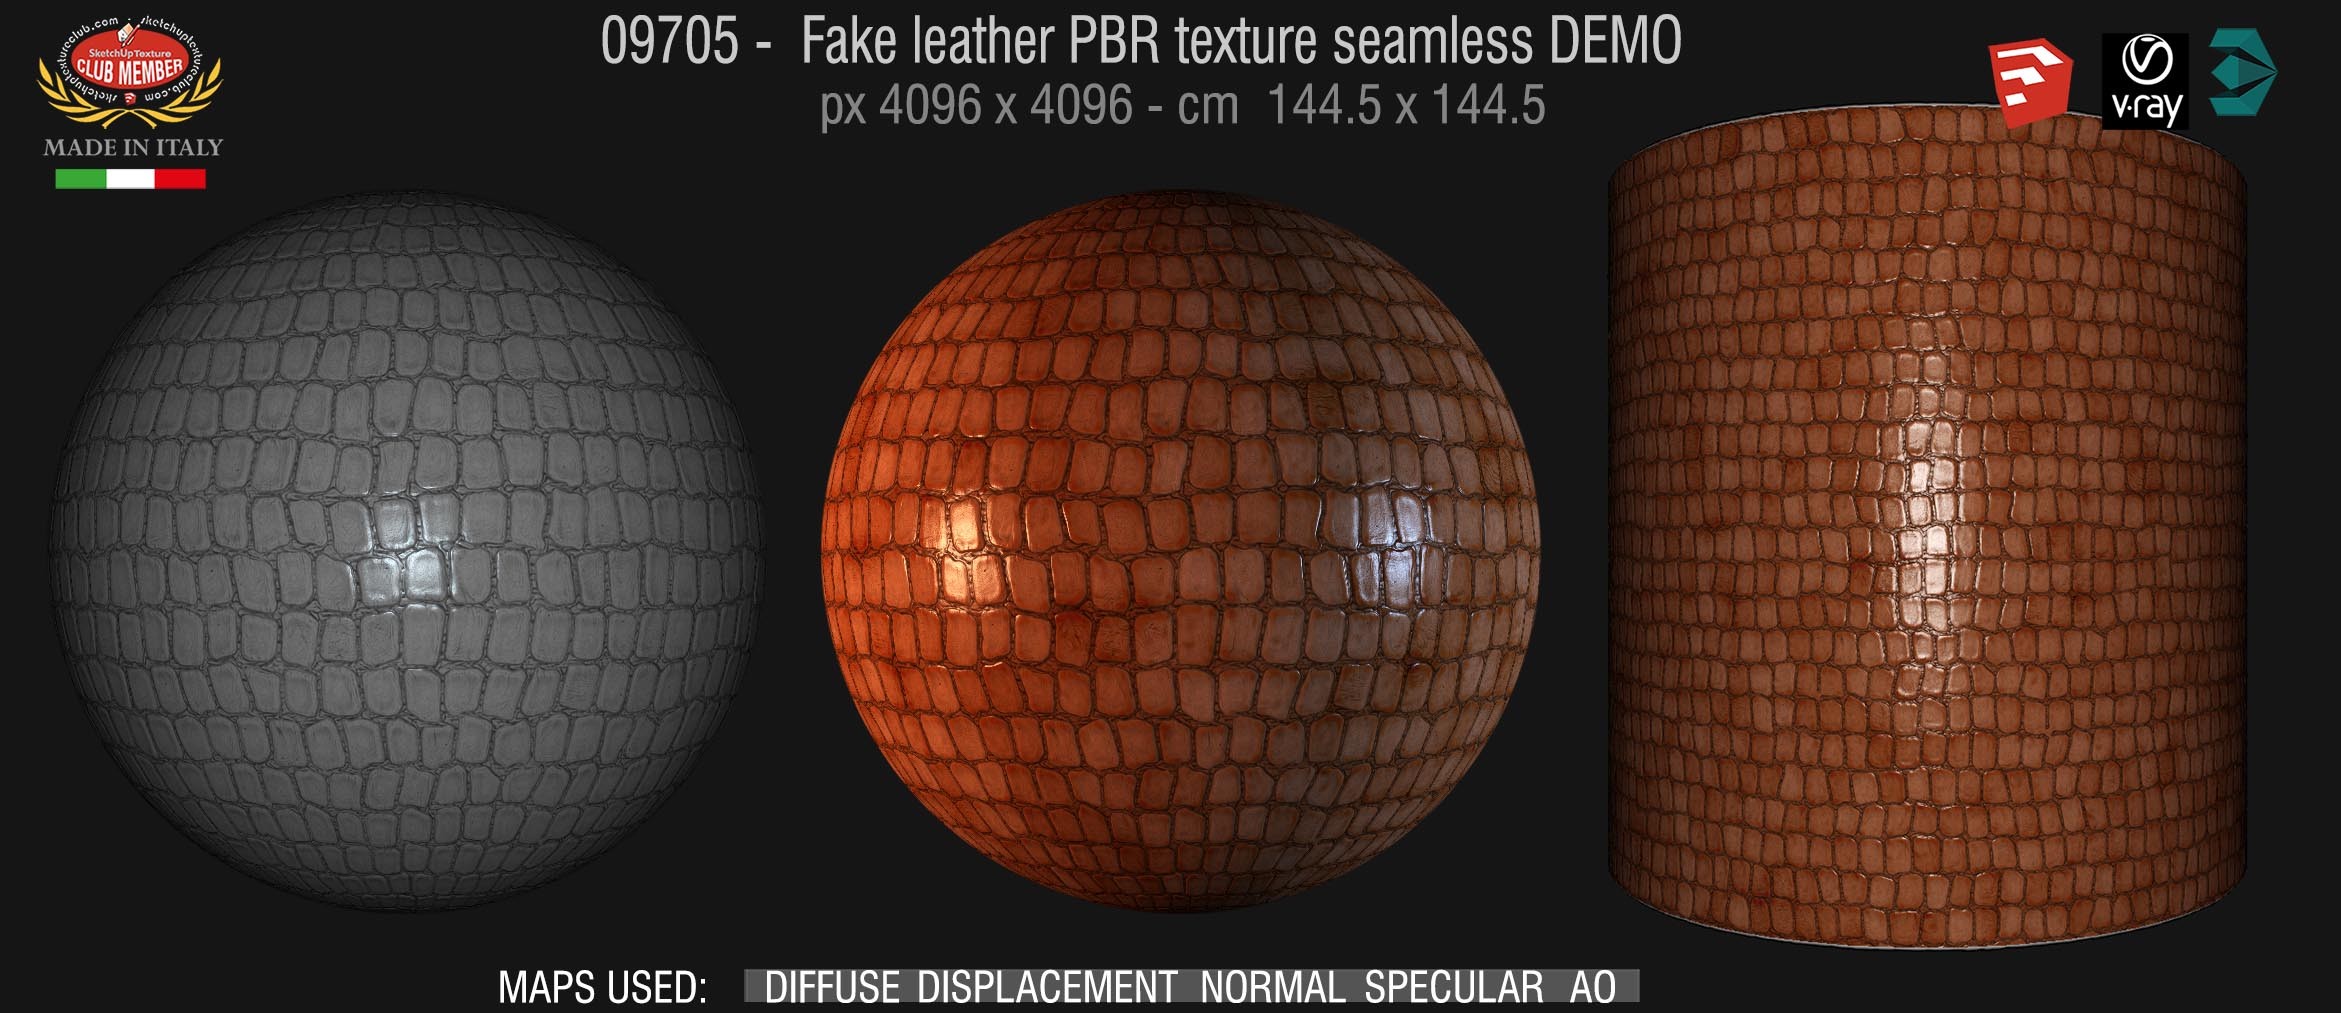 09705 fake leather PBR texture seamless DEMO